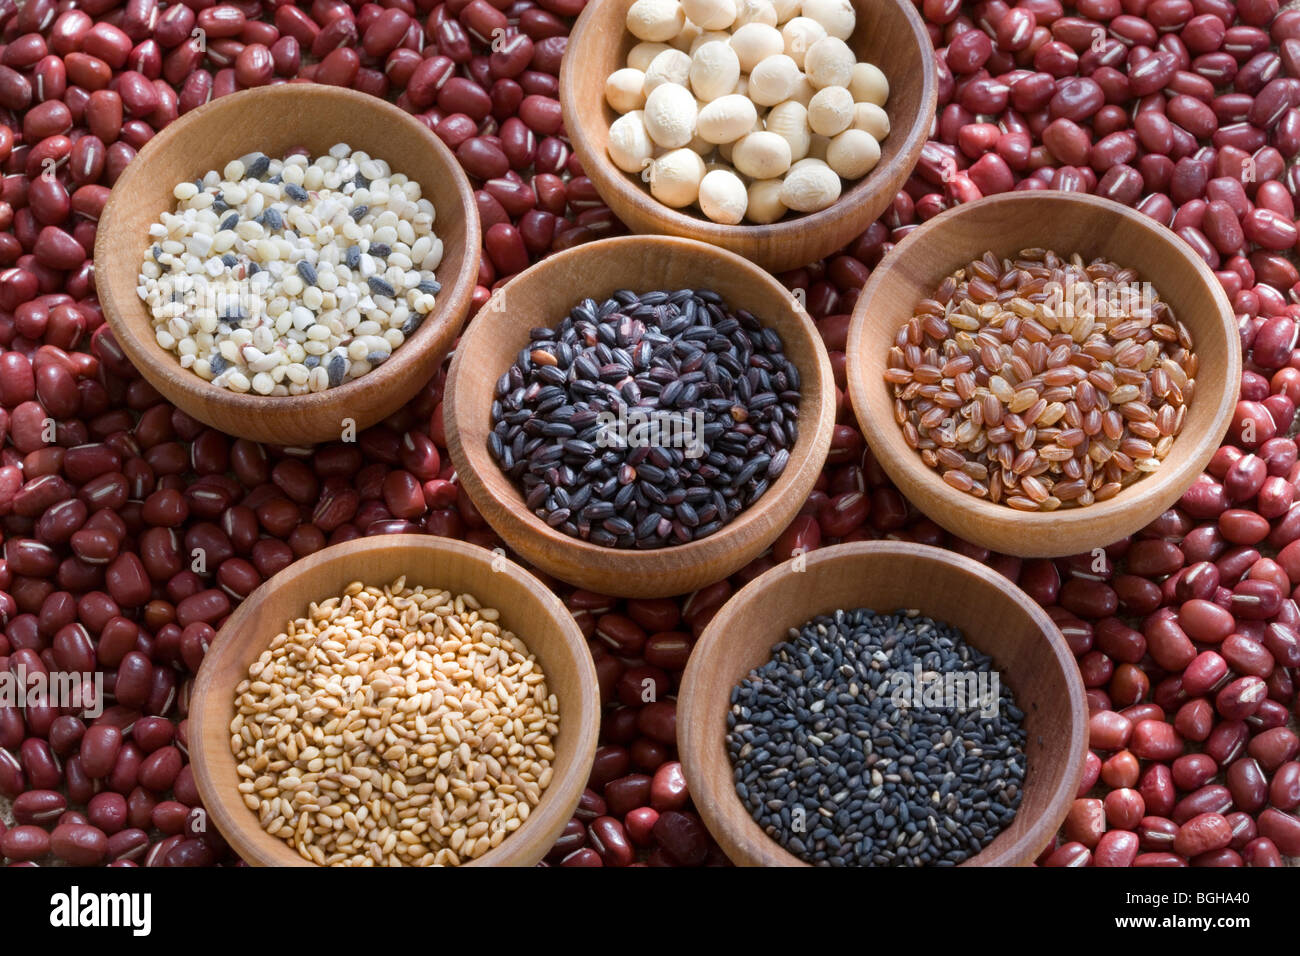 Wooden bowls of different grains rice and beans on top of adzuki beans Stock Photo